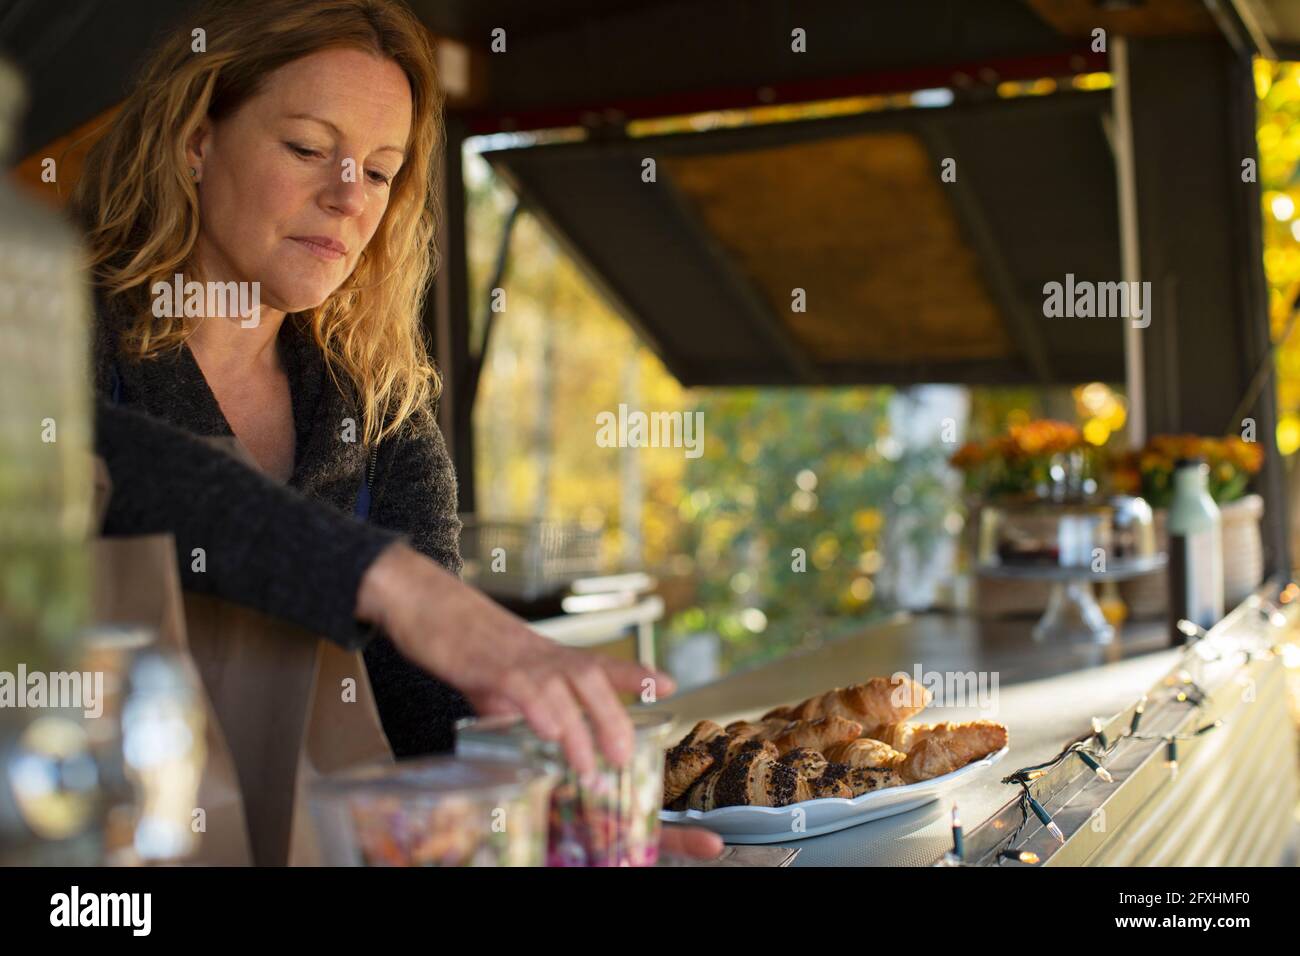 Female food cart owner arranging pastries Stock Photo